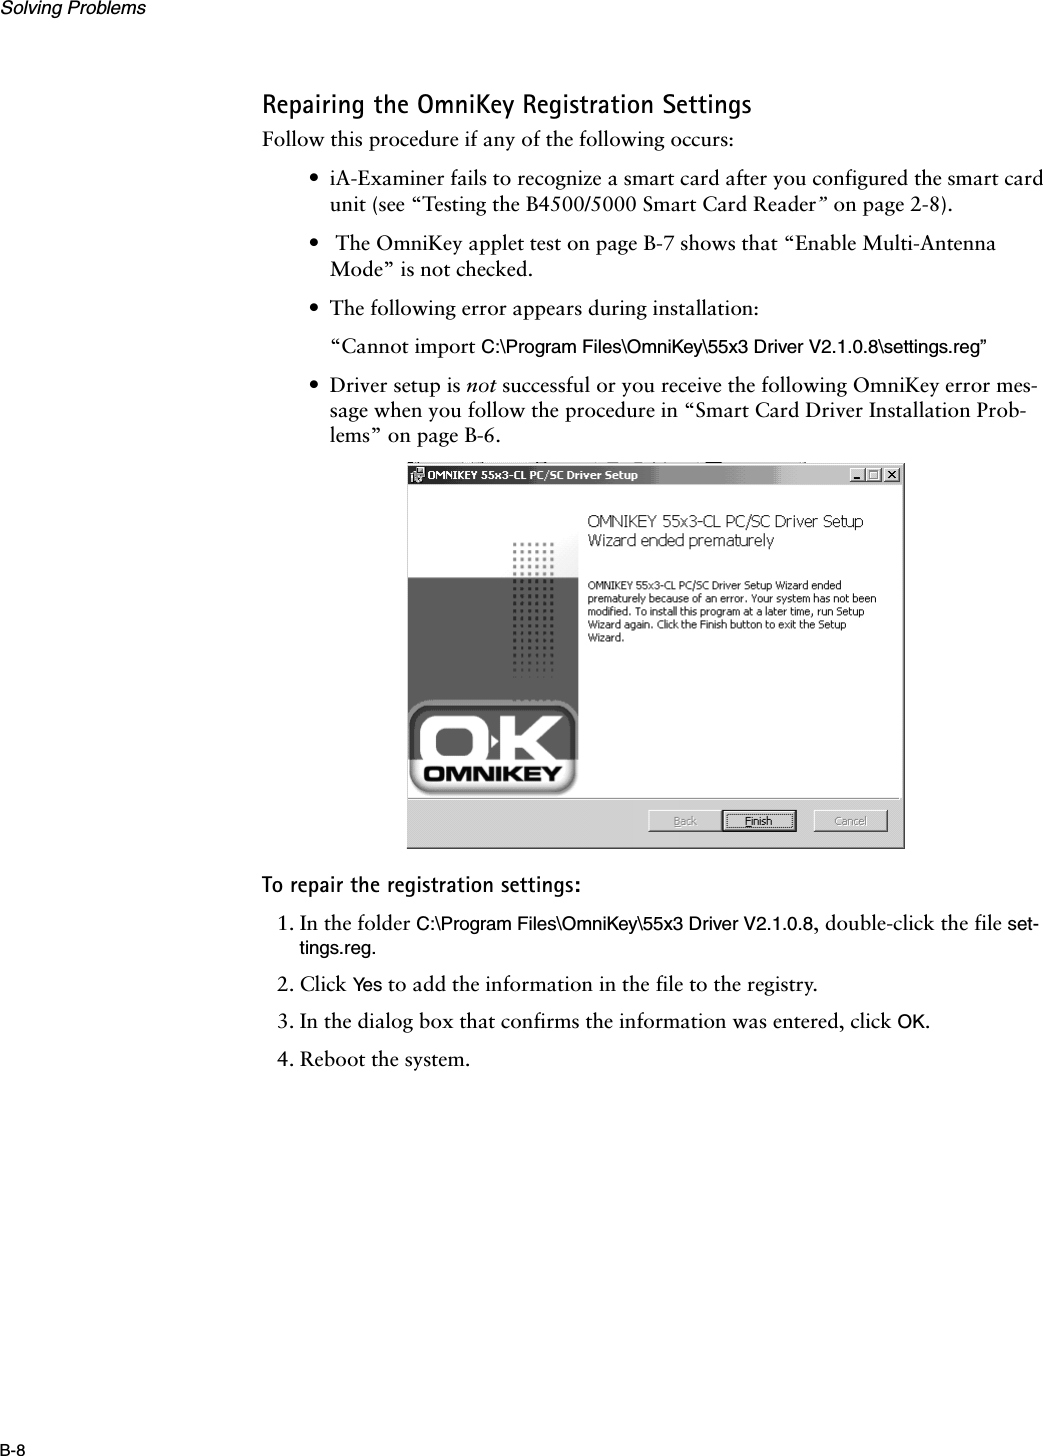 Solving ProblemsB-8Repairing the OmniKey Registration SettingsFollow this procedure if any of the following occurs:•iA-Examiner fails to recognize a smart card after you configured the smart card unit (see “Testing the B4500/5000 Smart Card Reader” on page 2-8).• The OmniKey applet test on page B-7 shows that “Enable Multi-Antenna Mode” is not checked.•The following error appears during installation:“Cannot import C:\Program Files\OmniKey\55x3 Driver V2.1.0.8\settings.reg”•Driver setup is not successful or you receive the following OmniKey error mes-sage when you follow the procedure in “Smart Card Driver Installation Prob-lems” on page B-6.To repair the registration settings:1. In the folder C:\Program Files\OmniKey\55x3 Driver V2.1.0.8, double-click the file set-tings.reg.2. Click Ye s  to add the information in the file to the registry.3. In the dialog box that confirms the information was entered, click OK.4. Reboot the system.